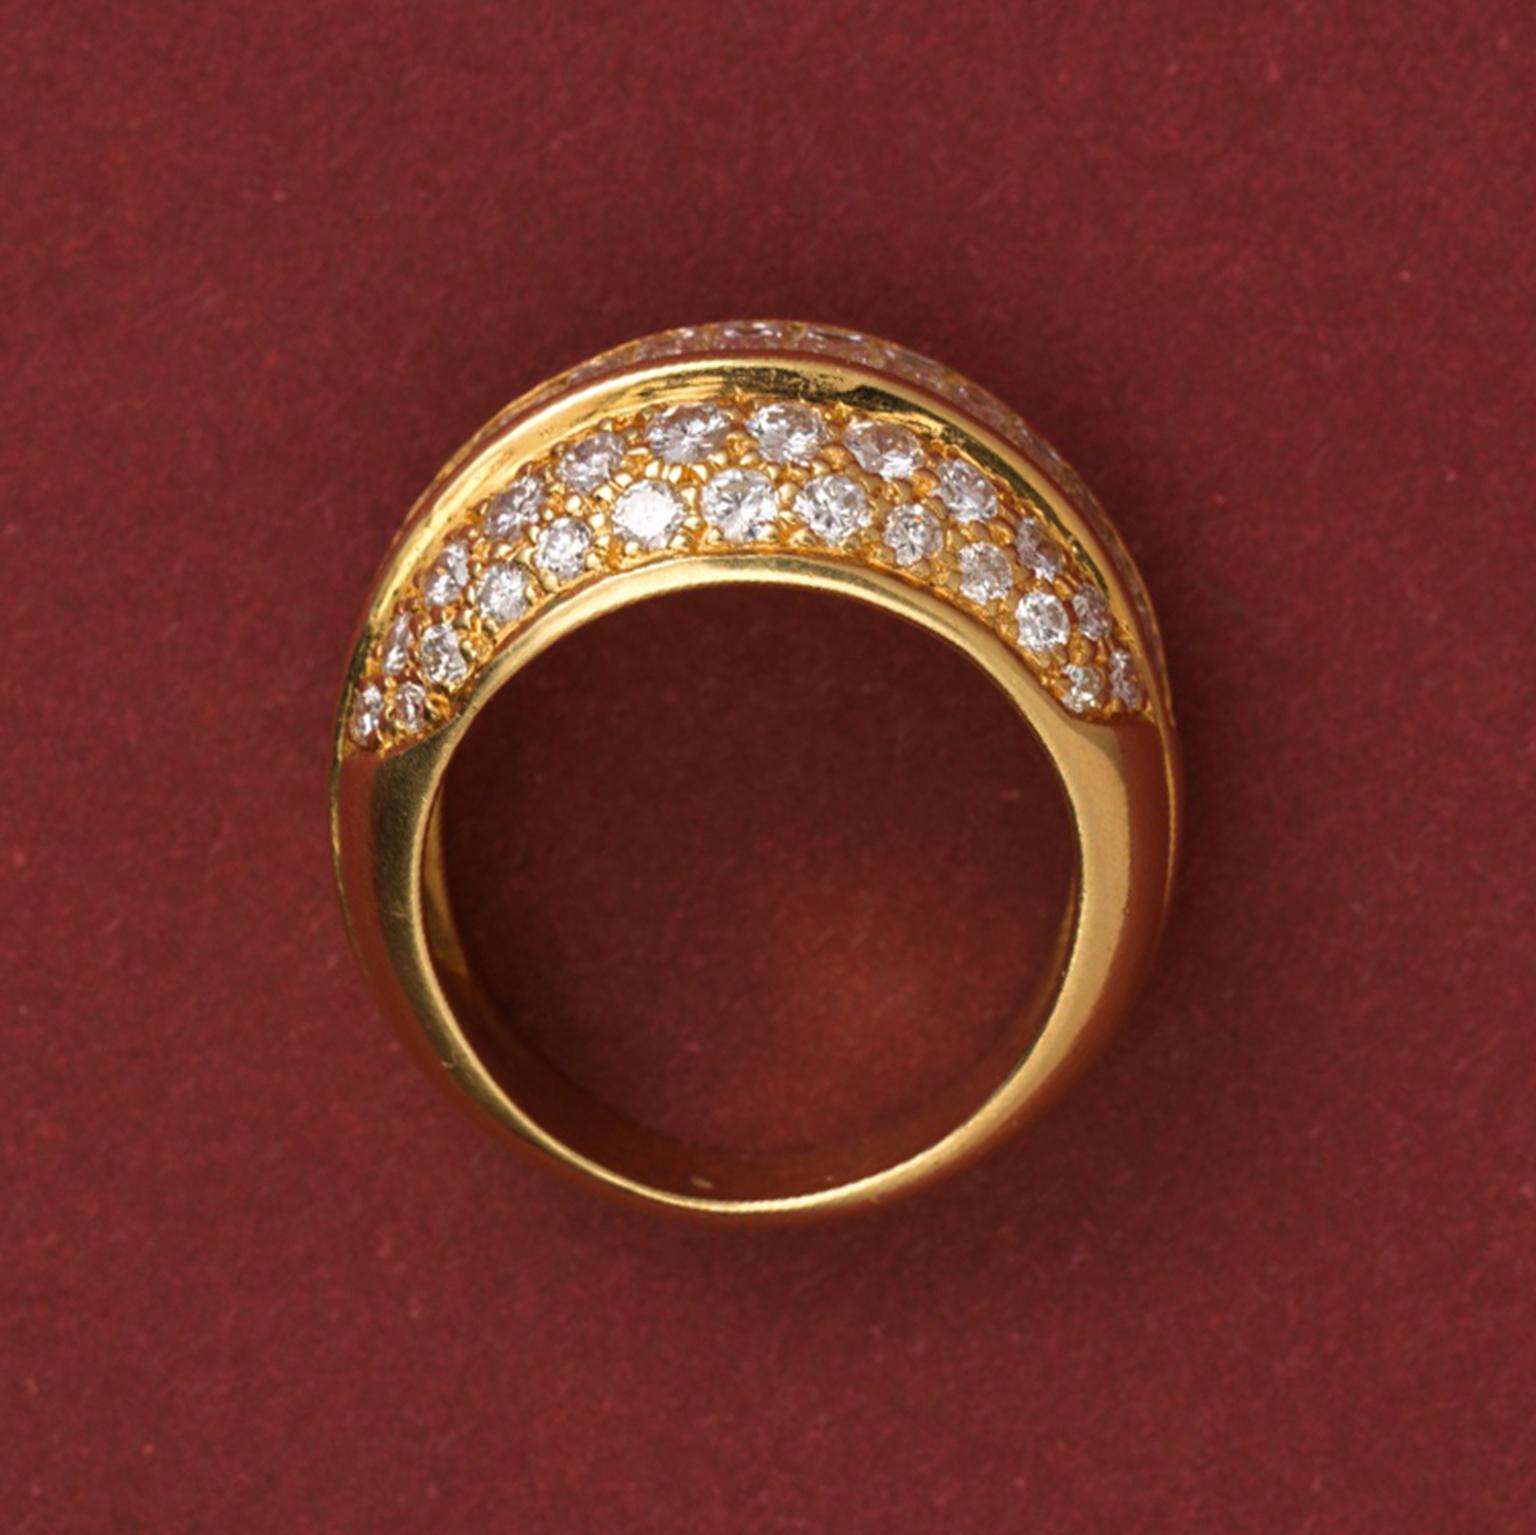 An 18 carat gold ring set with a vertical of 17 baguette cut diamonds around which are 46 brilliant cut diamonds (app. 3.2 carats), poinçon de maître JC, France, circa 1980.

weight: 9.5 gram
ring size: 16.5 mm. / 6 US.